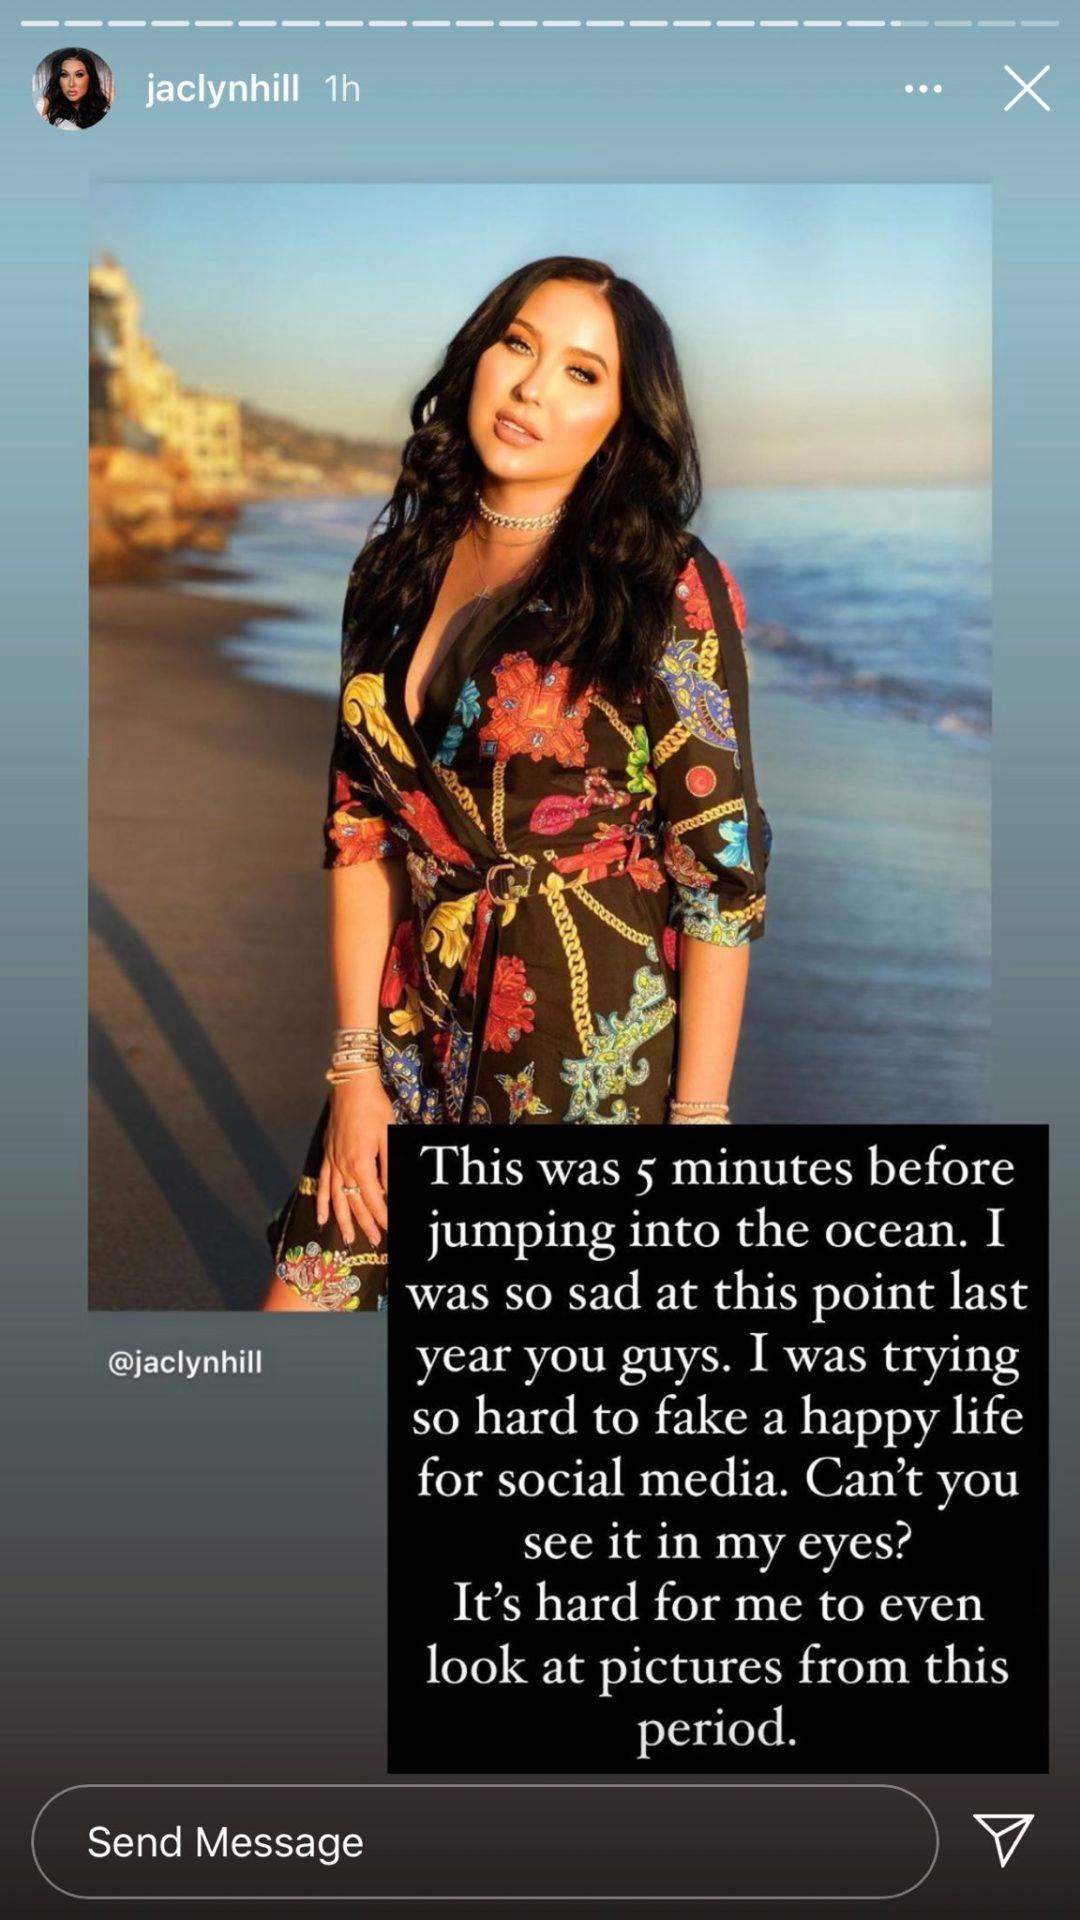 Jaclyn Hill poses on the beach with a caption on her Instagram story.